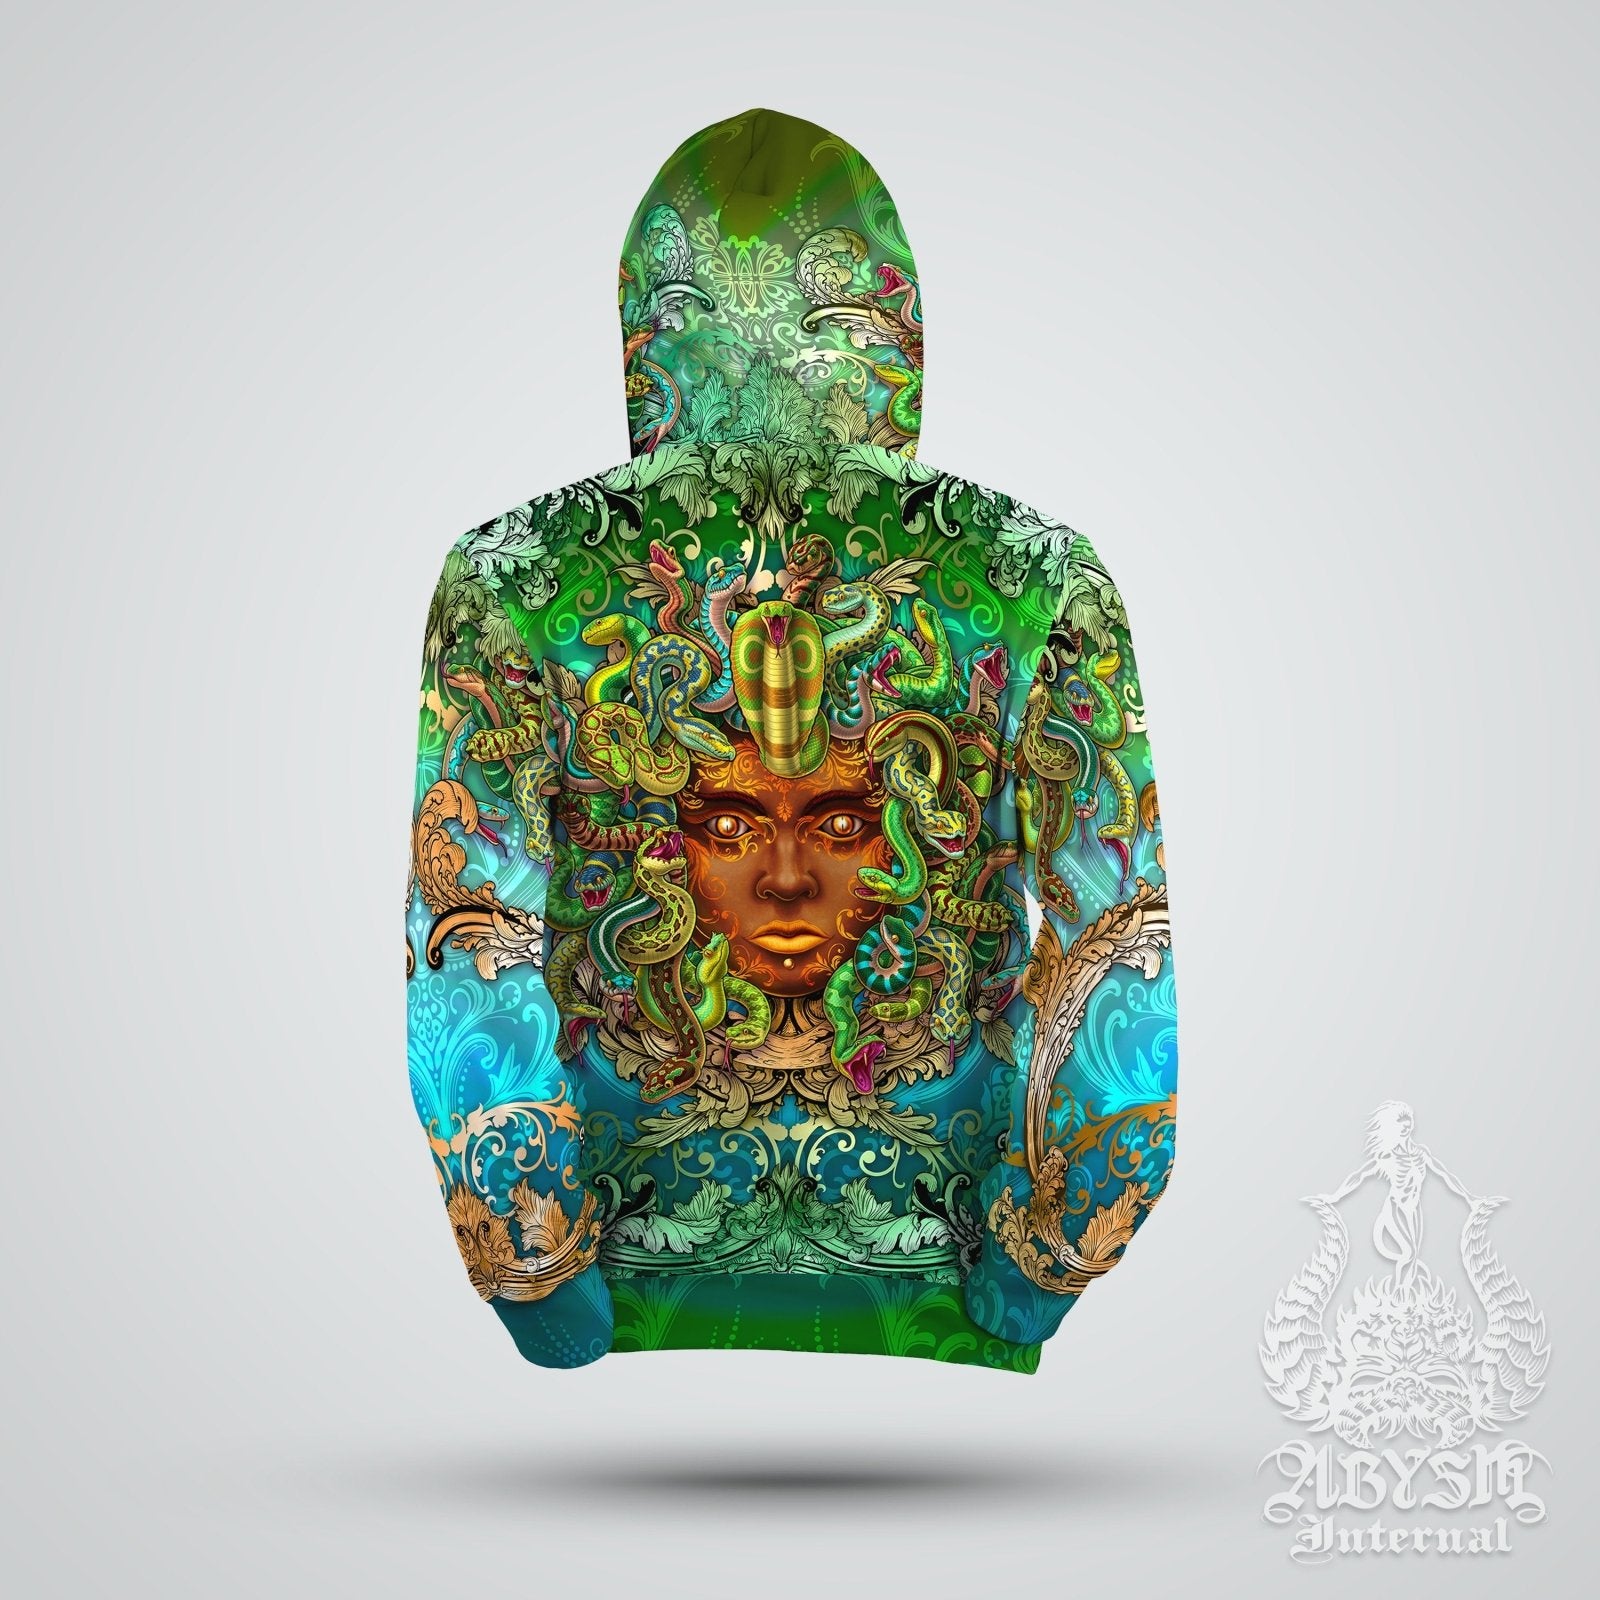 Graffiti Hoodie, Street Outfit, Witchy Streetwear, Pagan Festival, Alternative Clothing, Unisex - Medusa, Nature - Abysm Internal